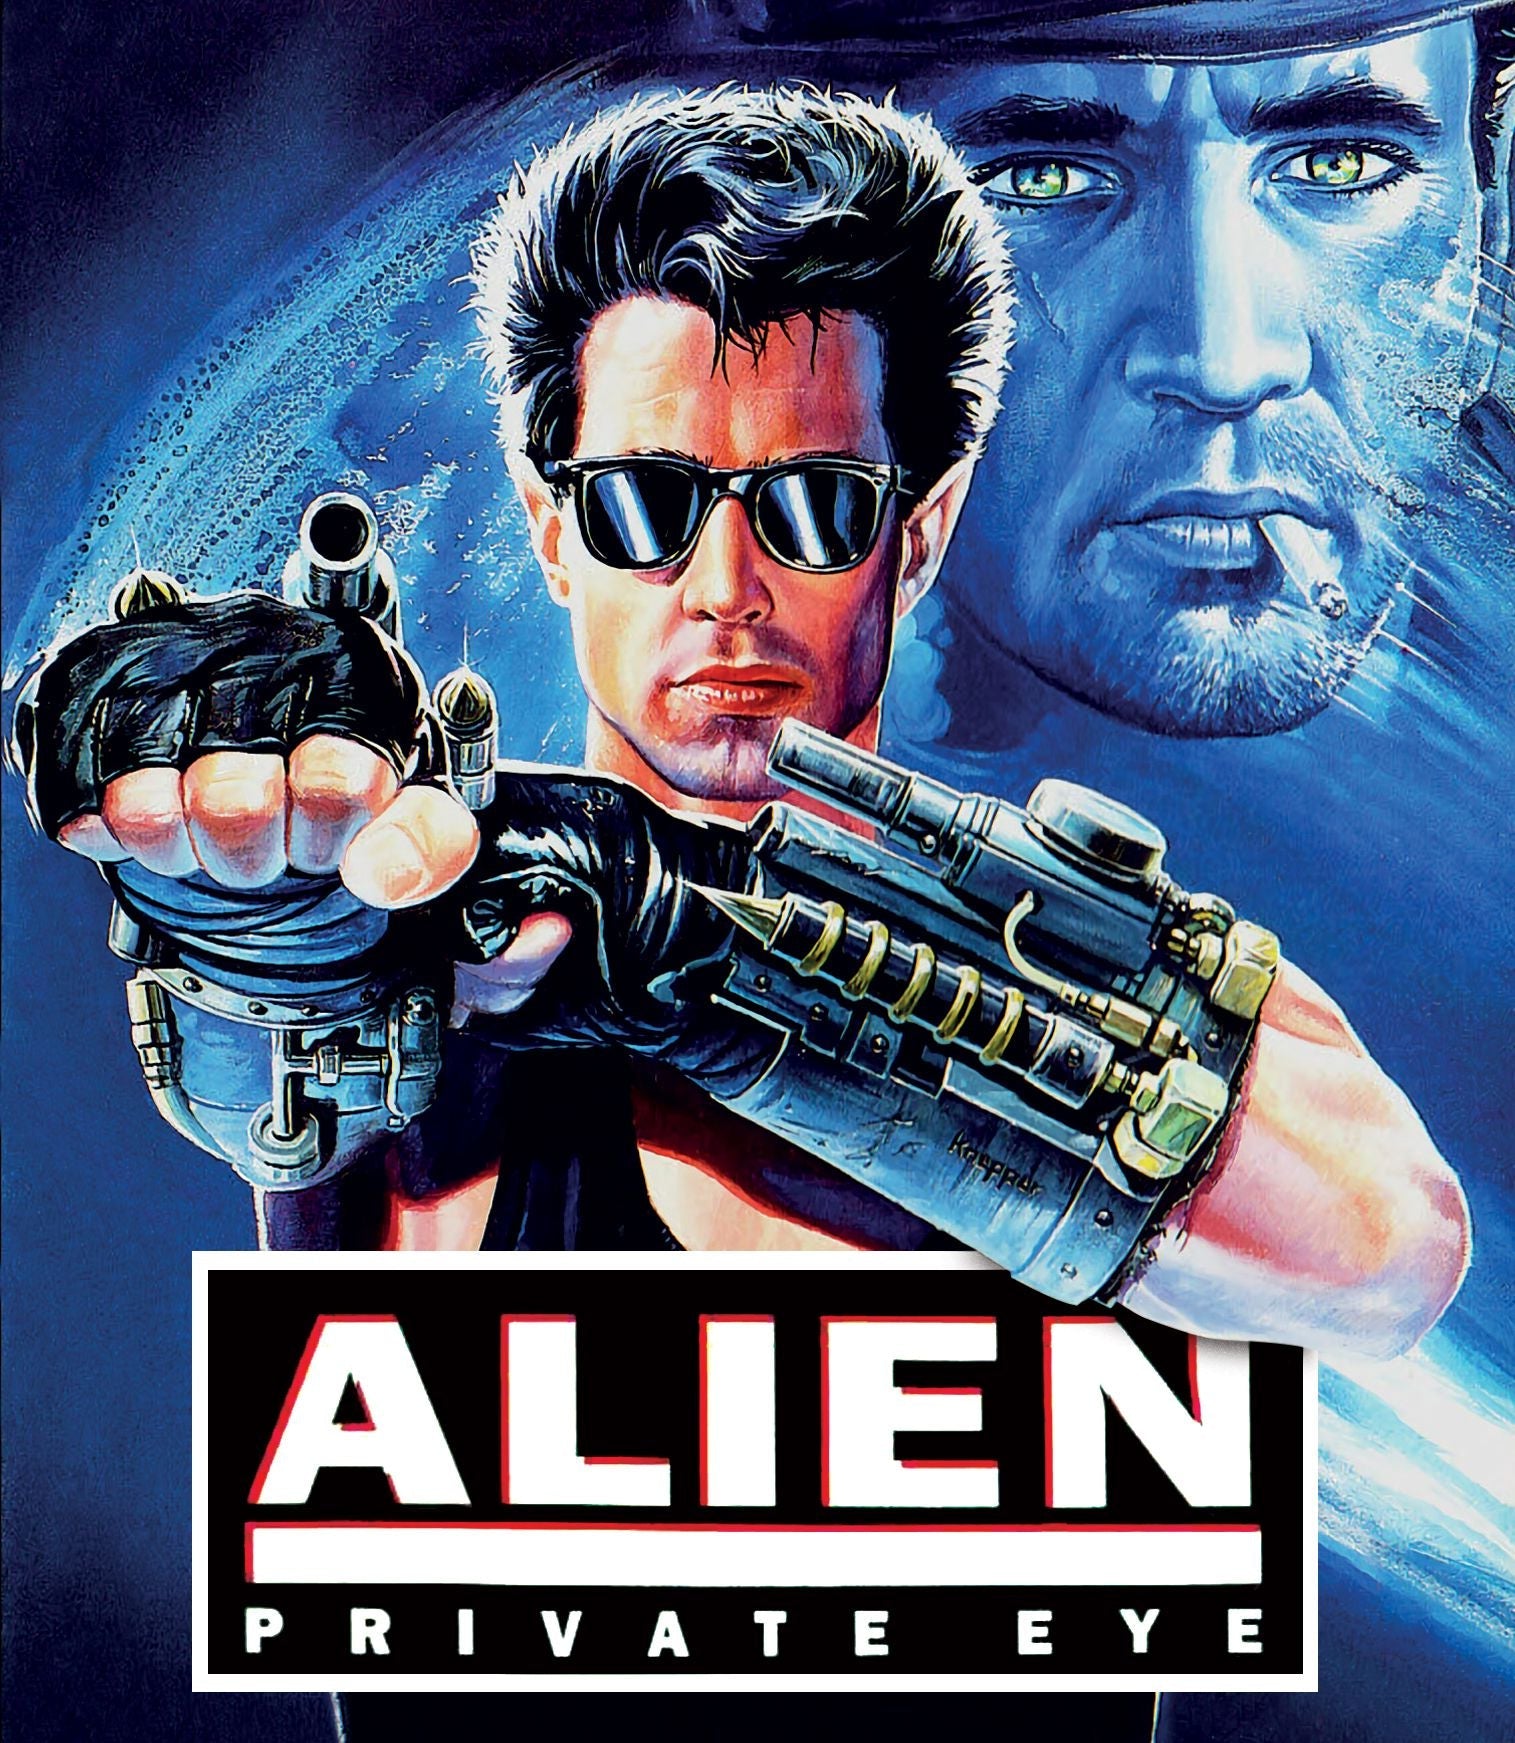 ALIEN PRIVATE EYE (LIMITED EDITION) BLU-RAY